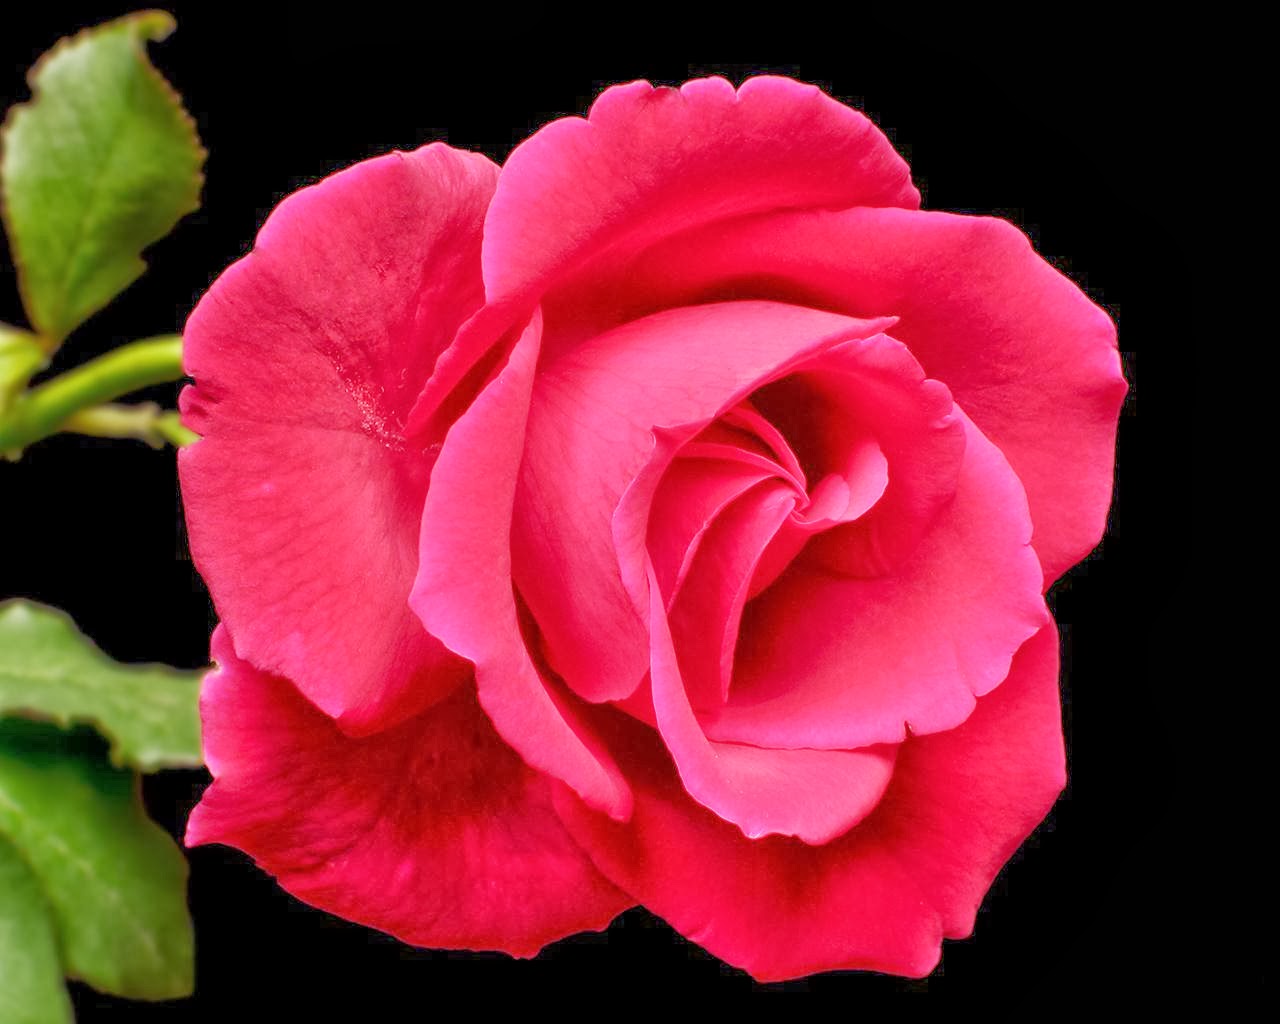 Very Nice Rose Flowers Wallpaper For Lovers